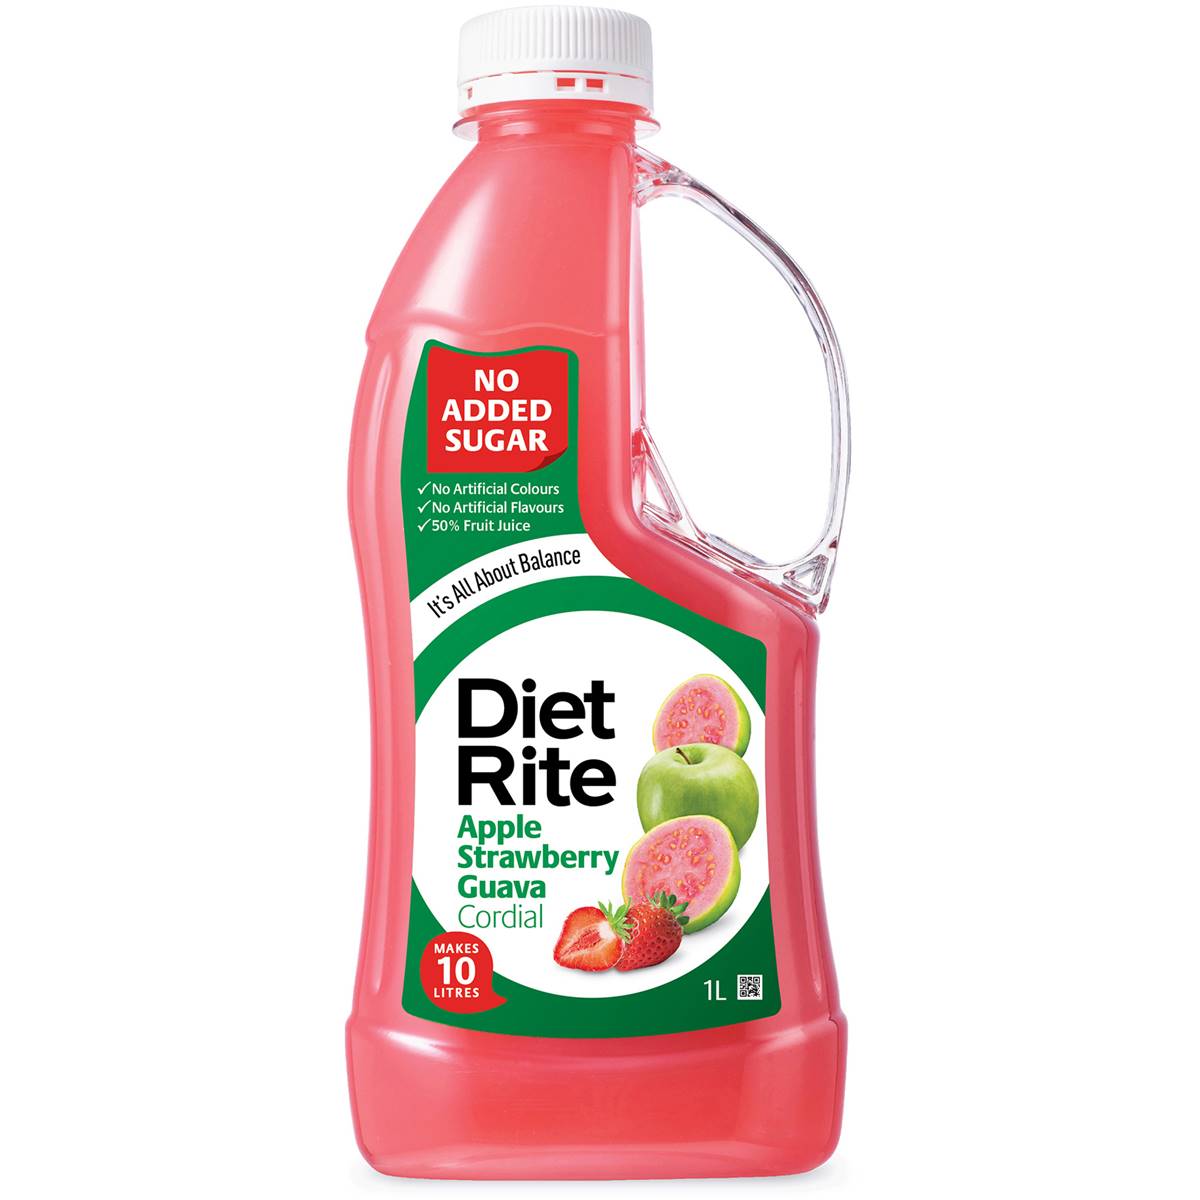 Calories in Diet Rite Apple Strawberry Guava Cordial